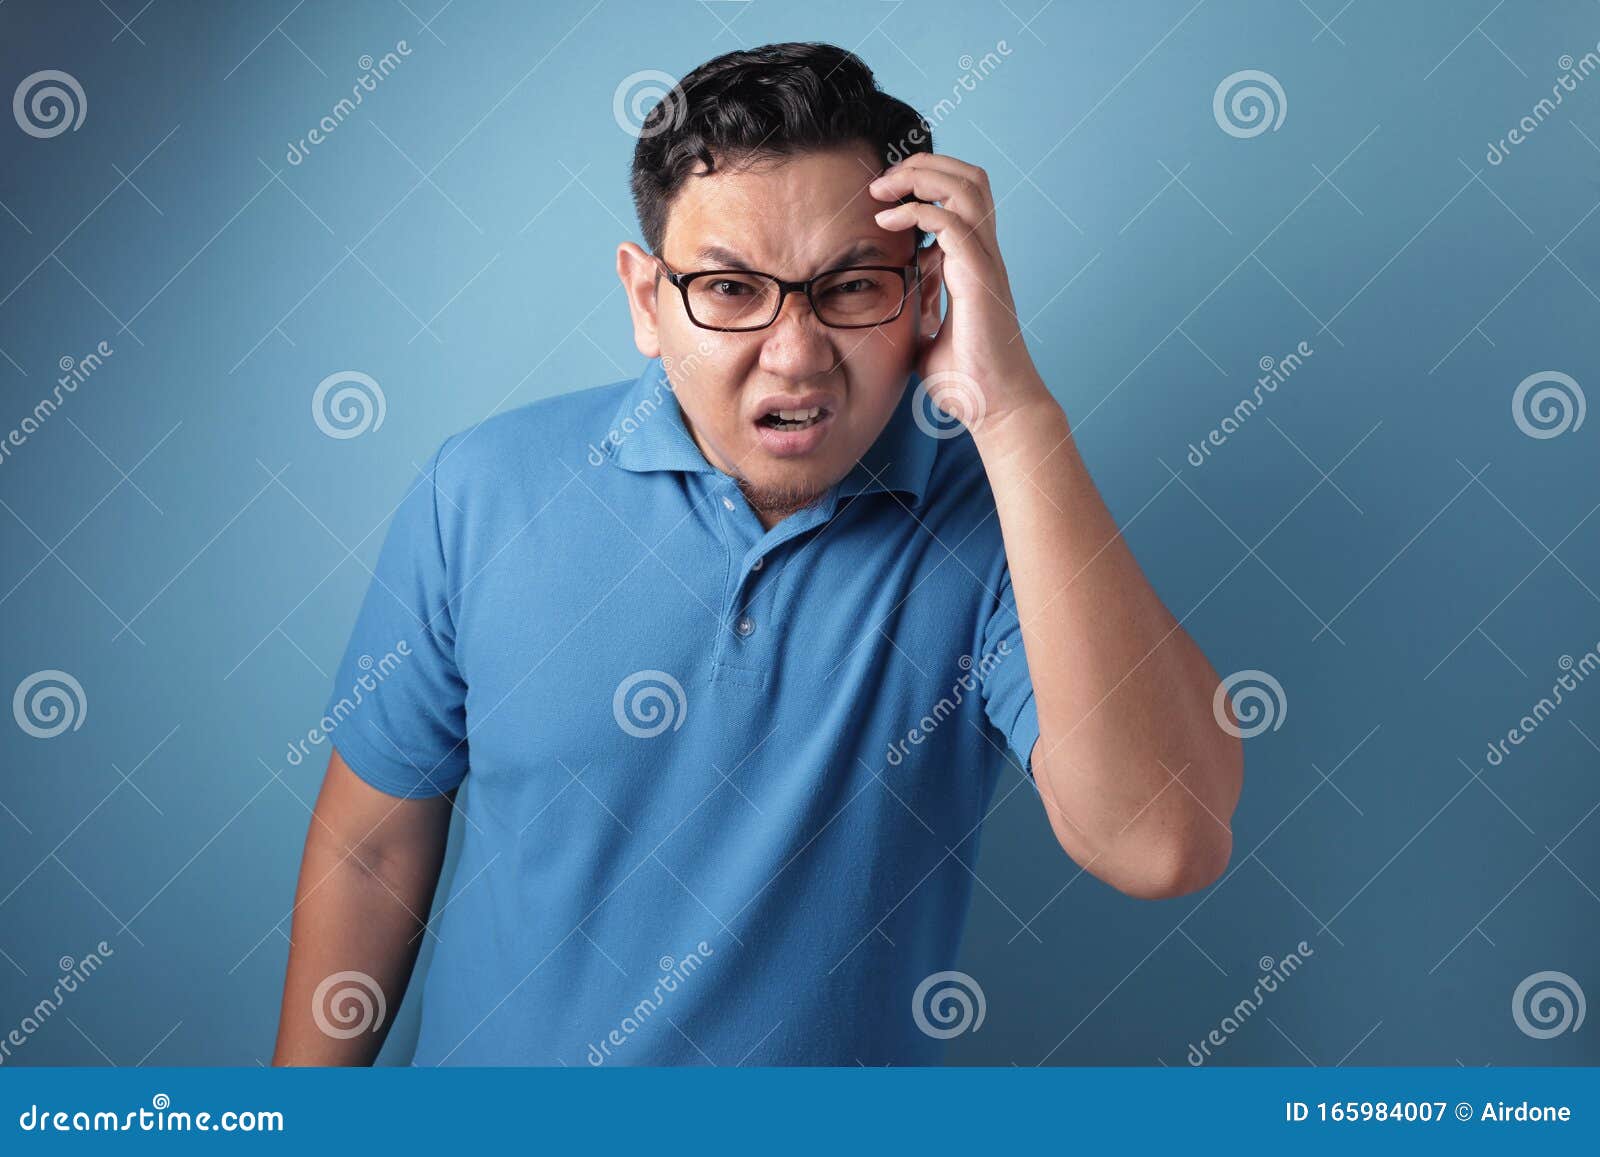 Funny Asian Man Looked Confused Stock Image - Image of depressed, facial:  165984007